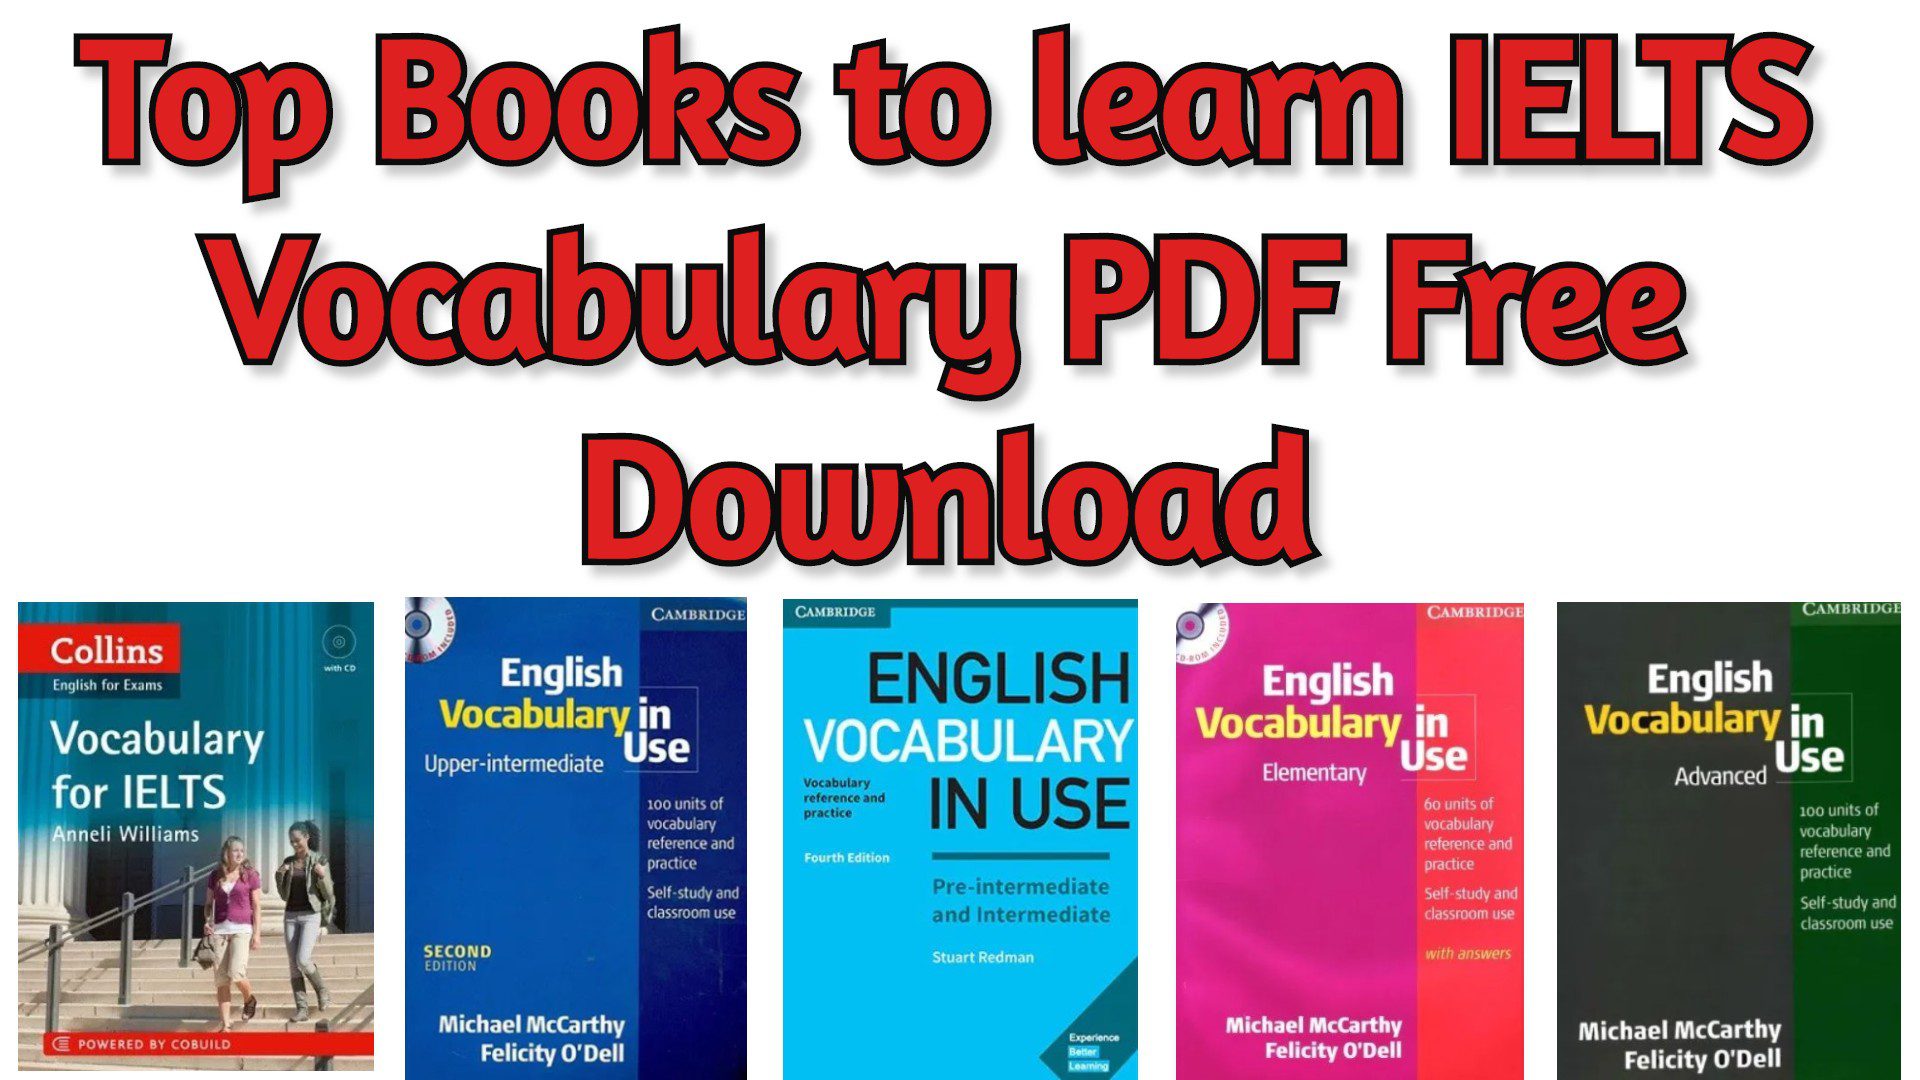 Top Books to learn IELTS Vocabulary 2021 PDF Free Download